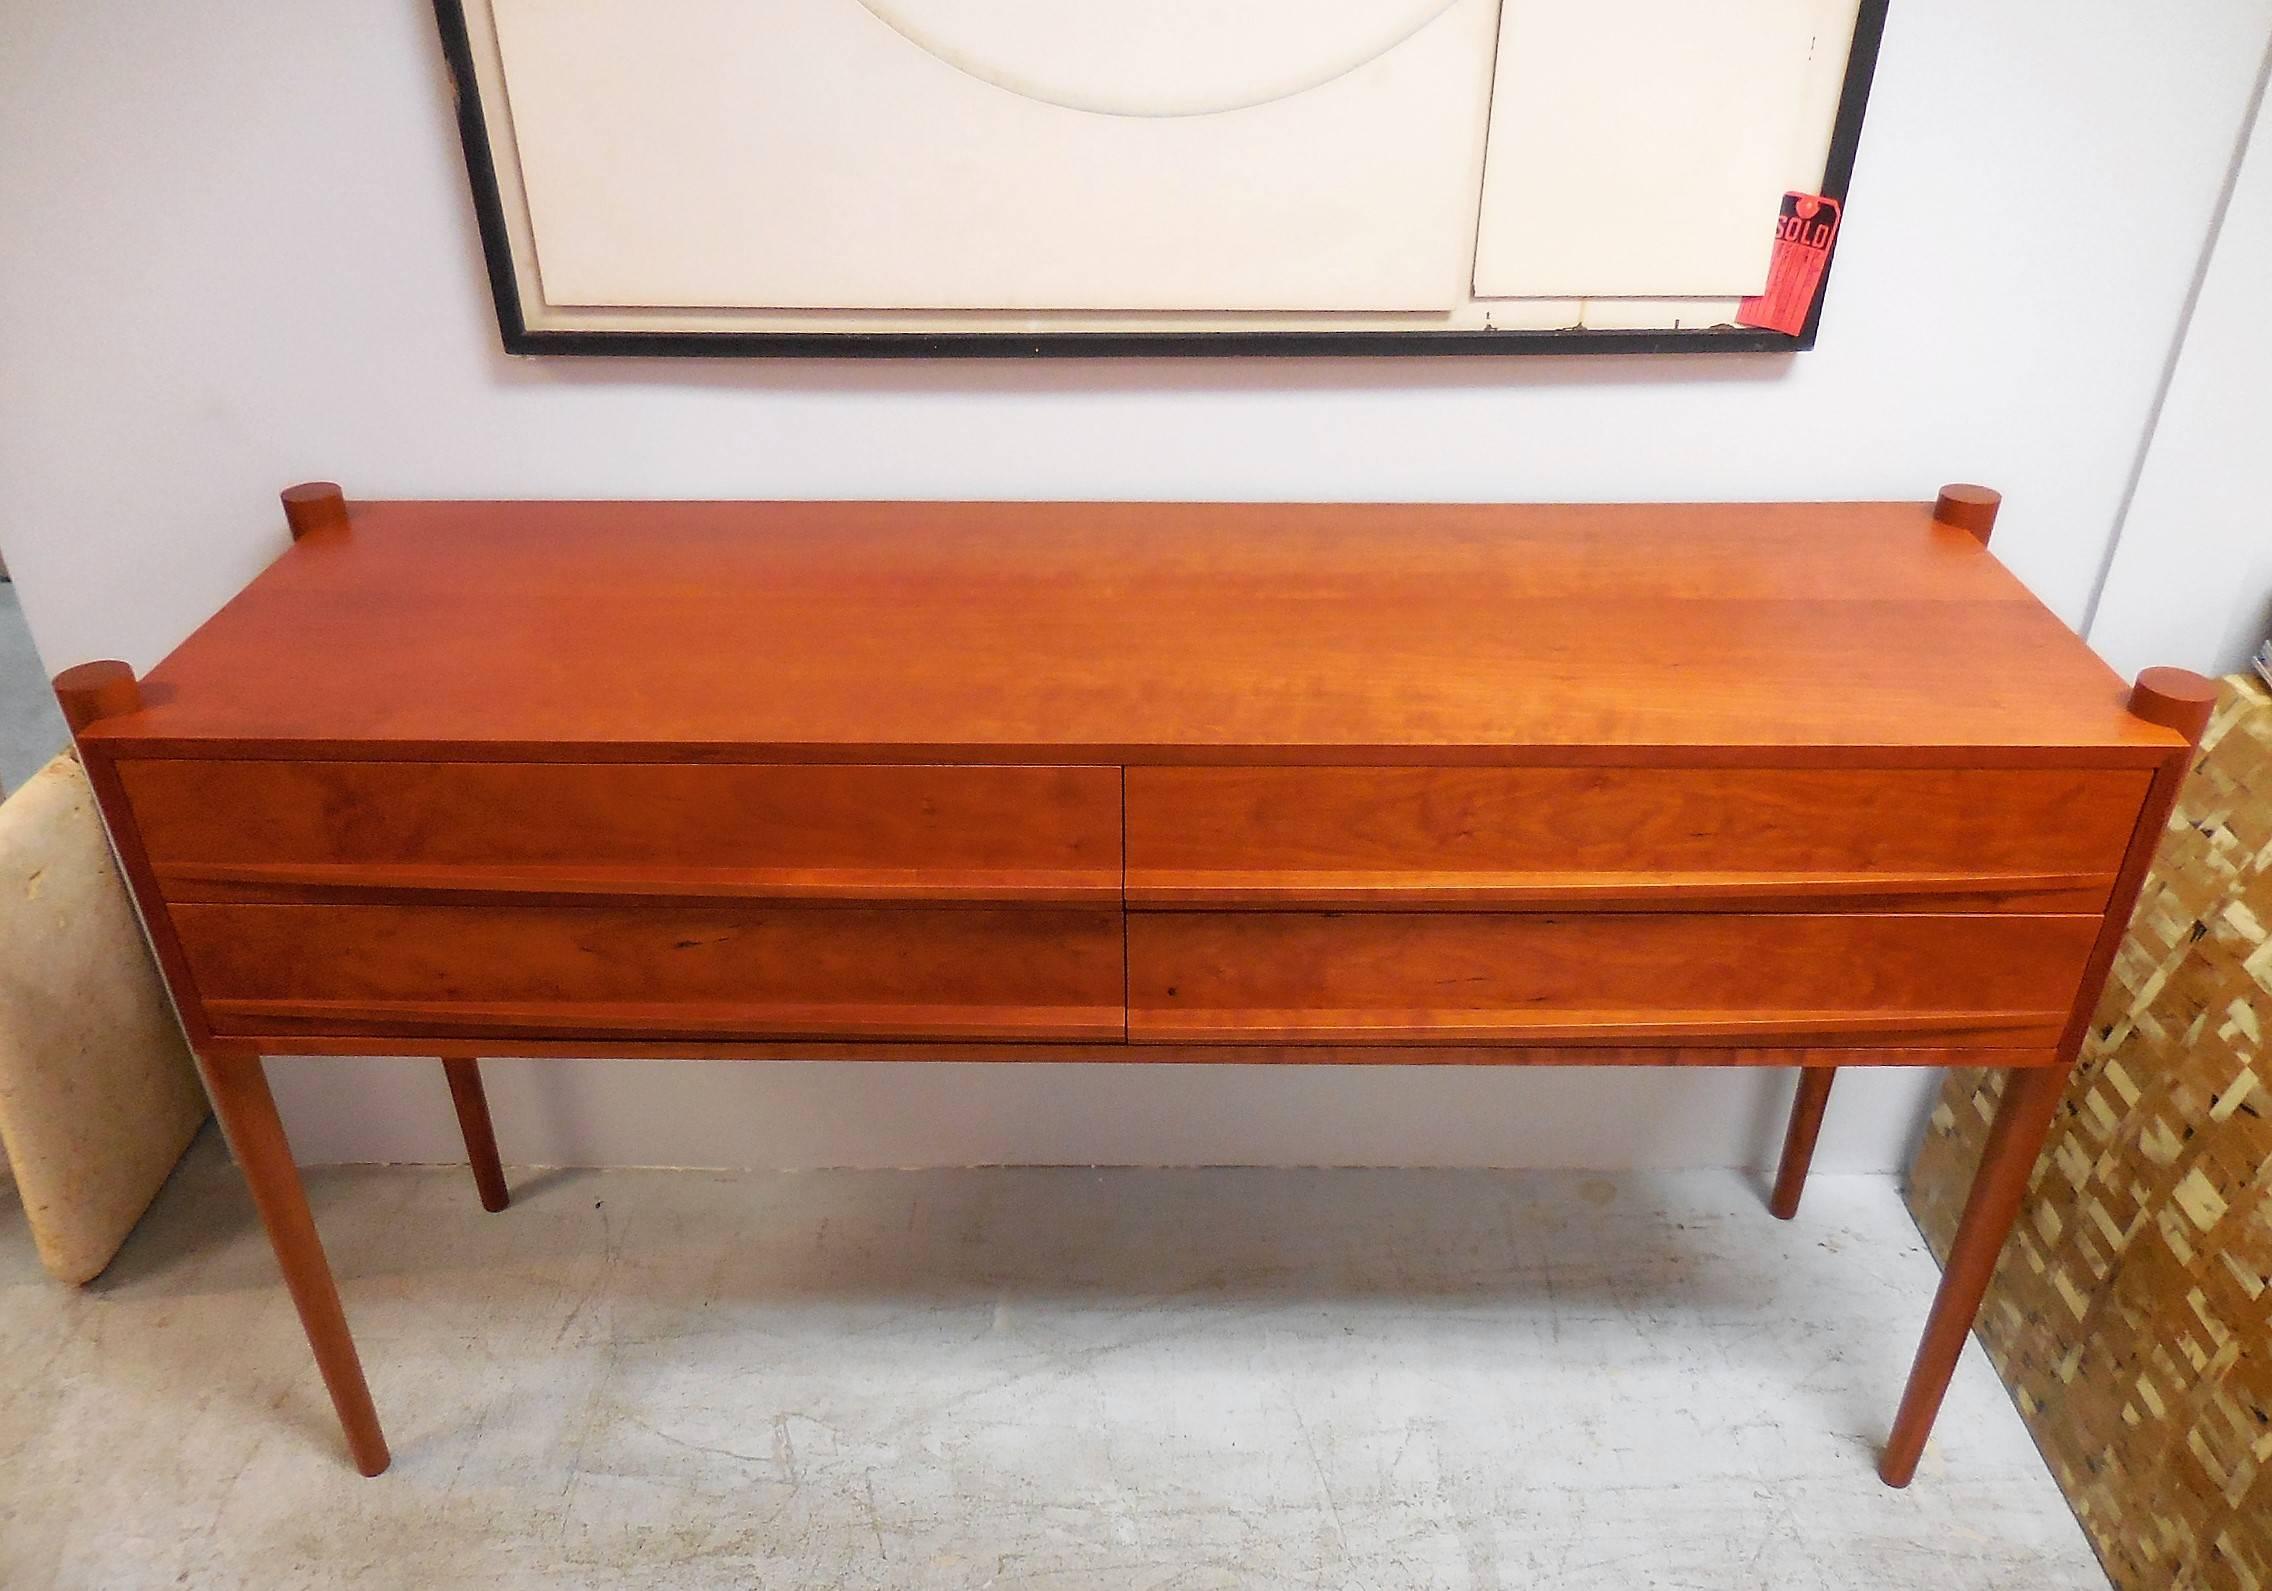 Great looking cabinet by Thos Moser. Hardwood construction in cherry with the secondary wood being oak, used to created the 4 dovetailed drawer interiors. Note the elliptical pulls and the slender tapering legs. The cabinet is a little taller than